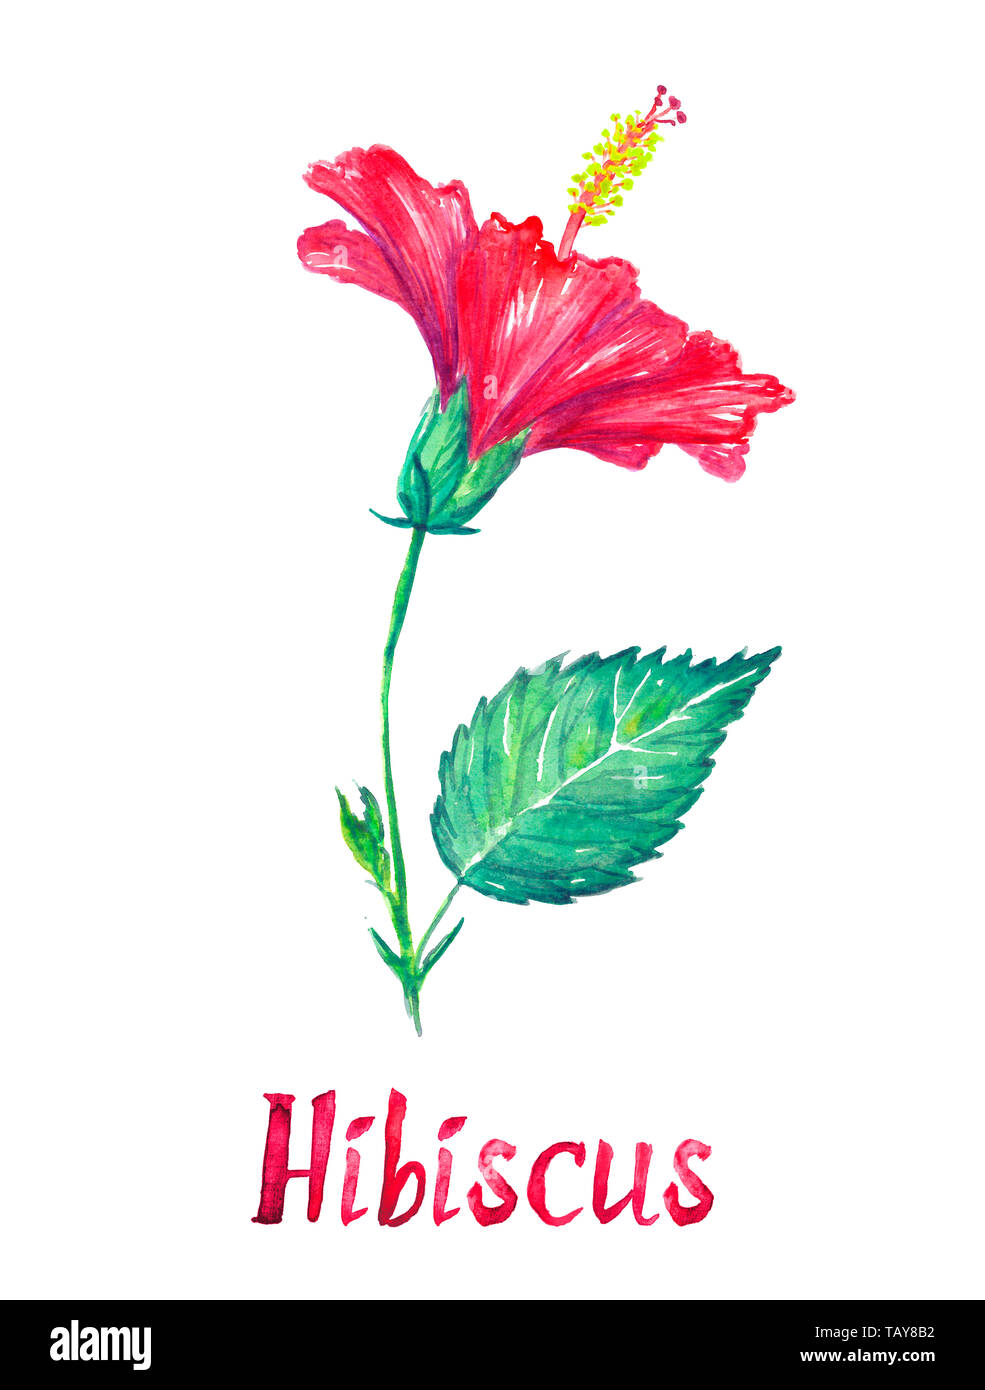 Hibiscus flower, side view with leaves , isolated on white hand painted watercolor illustration with handwritten inscription Stock Photo